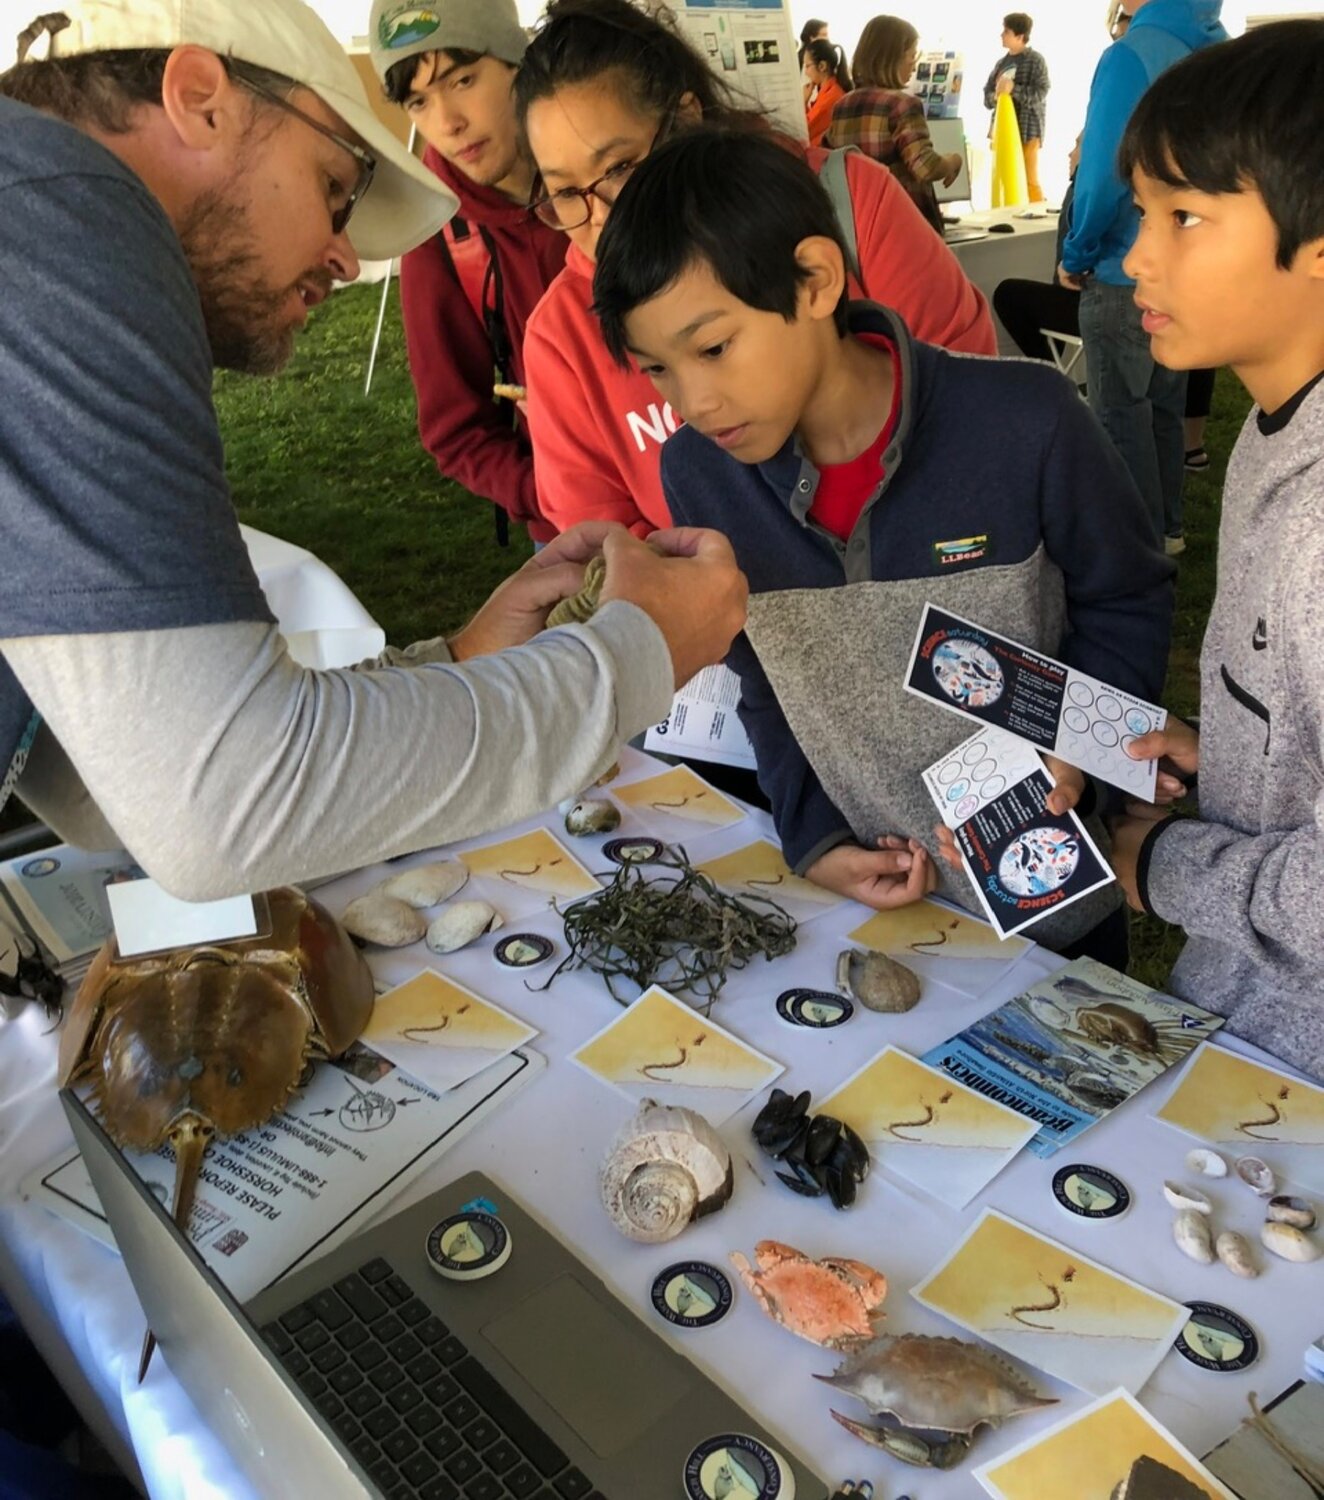 University of Rhode Island Coastal Institute will provide hands-on science activities at the Rain Harvest Festival.